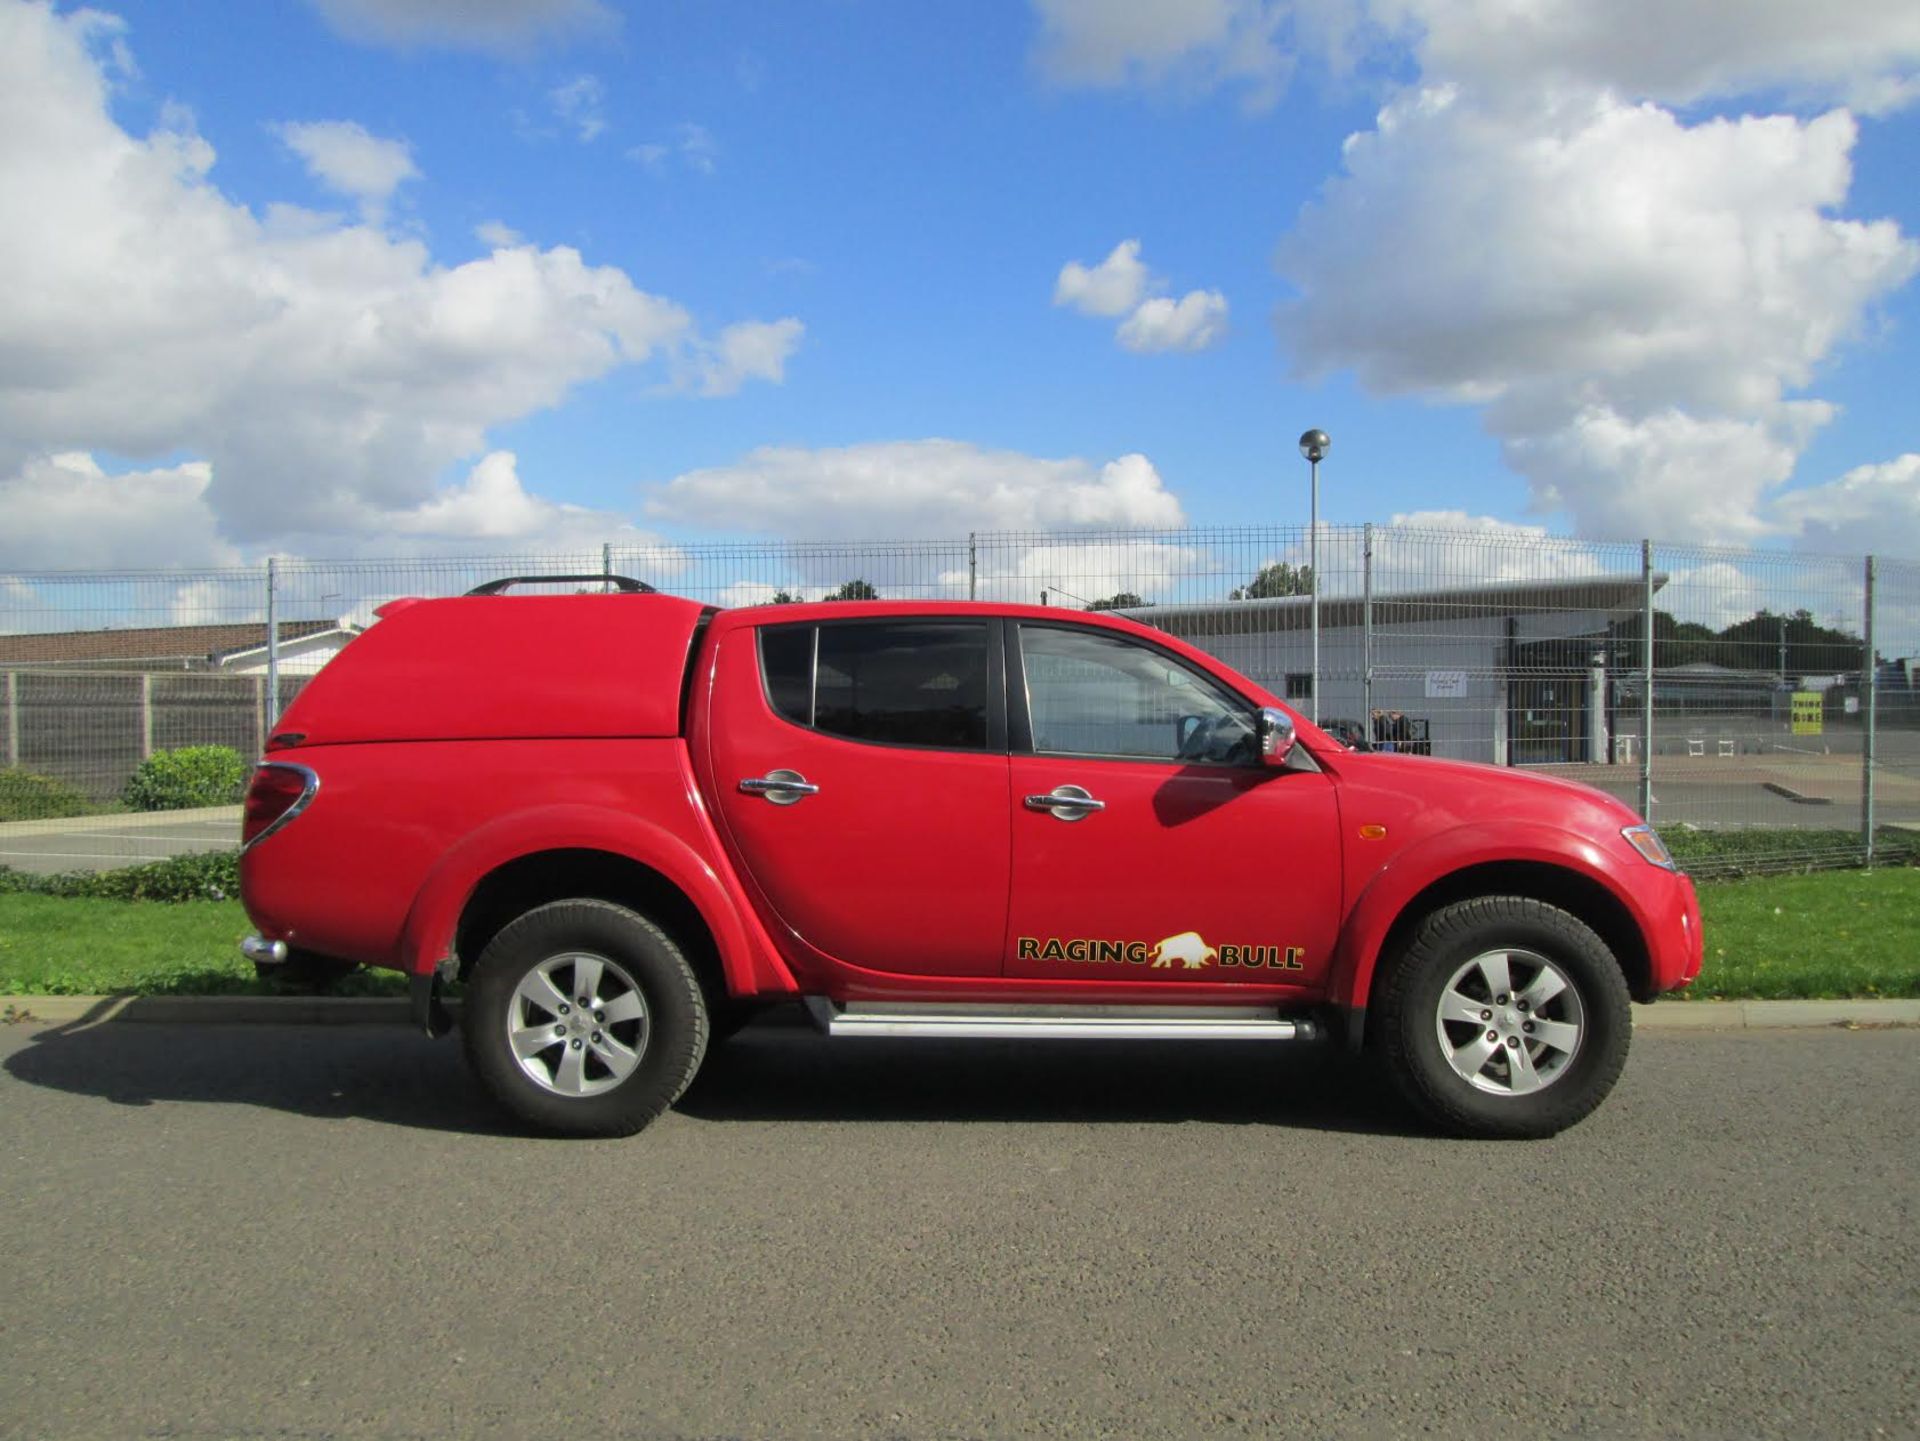 Mitsubishi L200 2.5 DI-D Raging Bull. 4dr, FSH, LEATHER, New CAMBELT @71k, 1 FORMER KEEPER. - Image 6 of 12